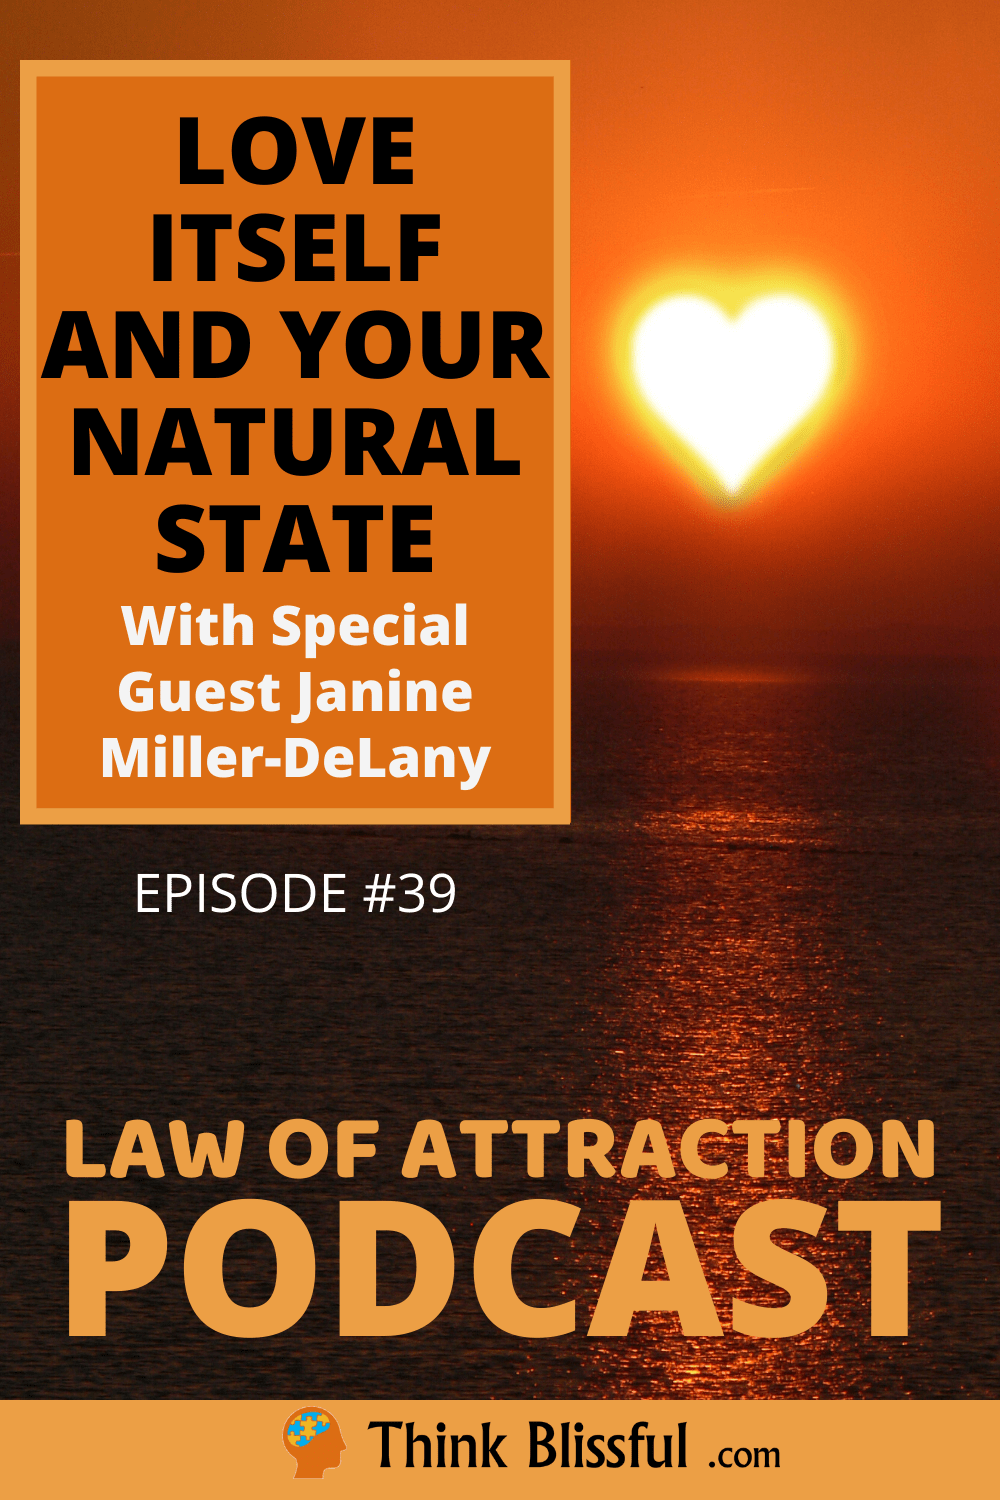 Love Itself And Your Natural State With Special Guest Janine Miller-DeLany